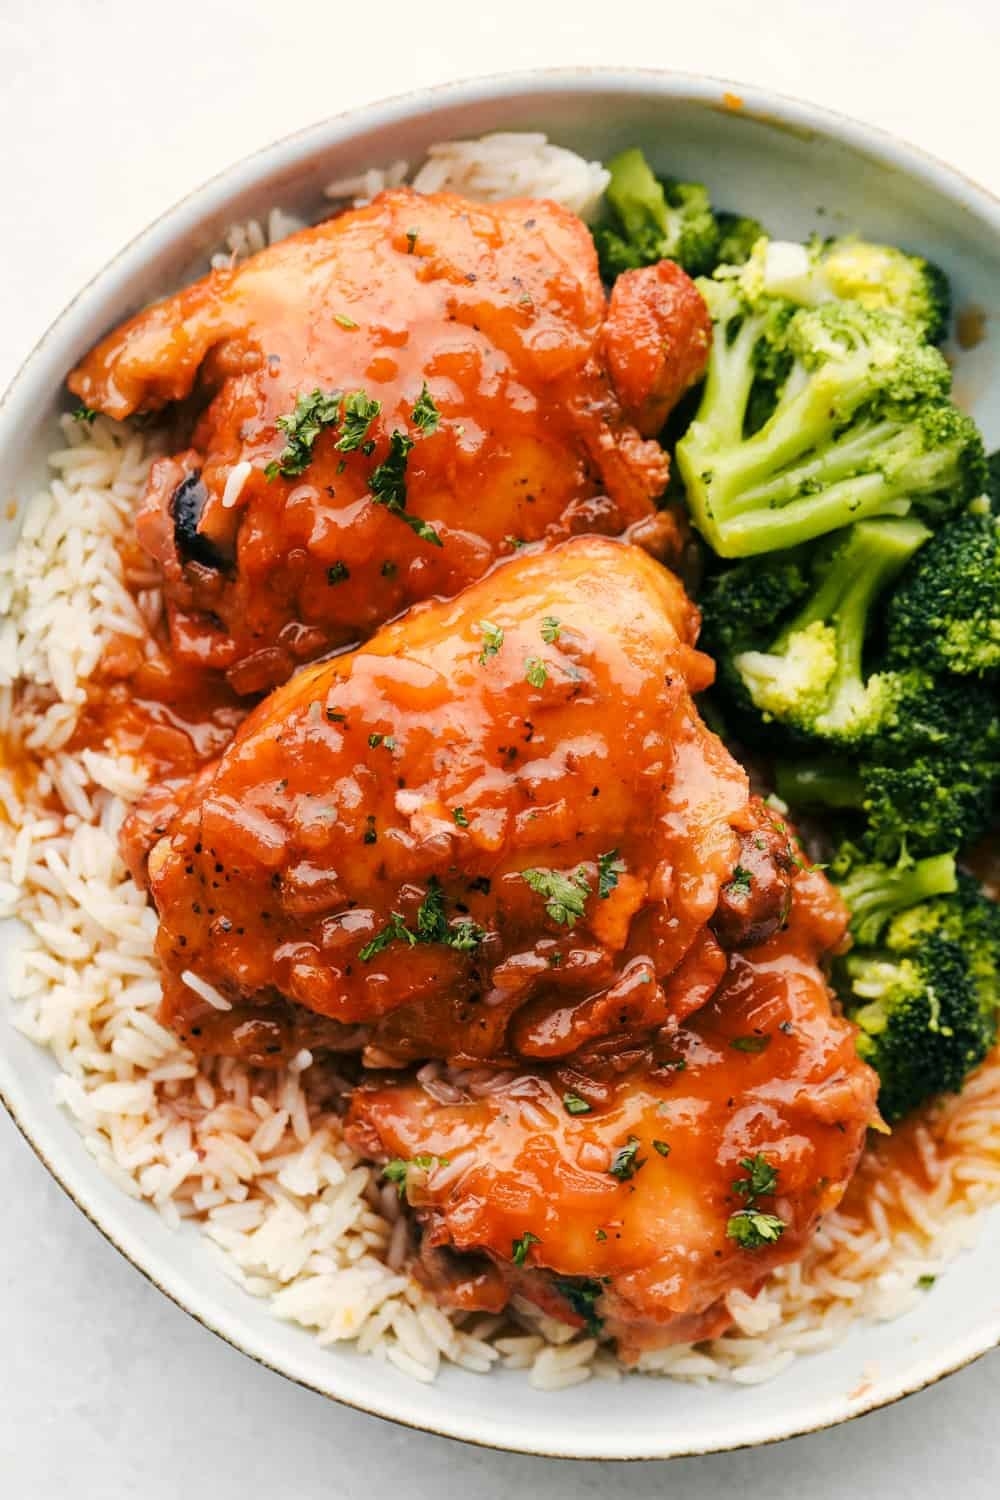 Apricot chicken over rice with broccoli.